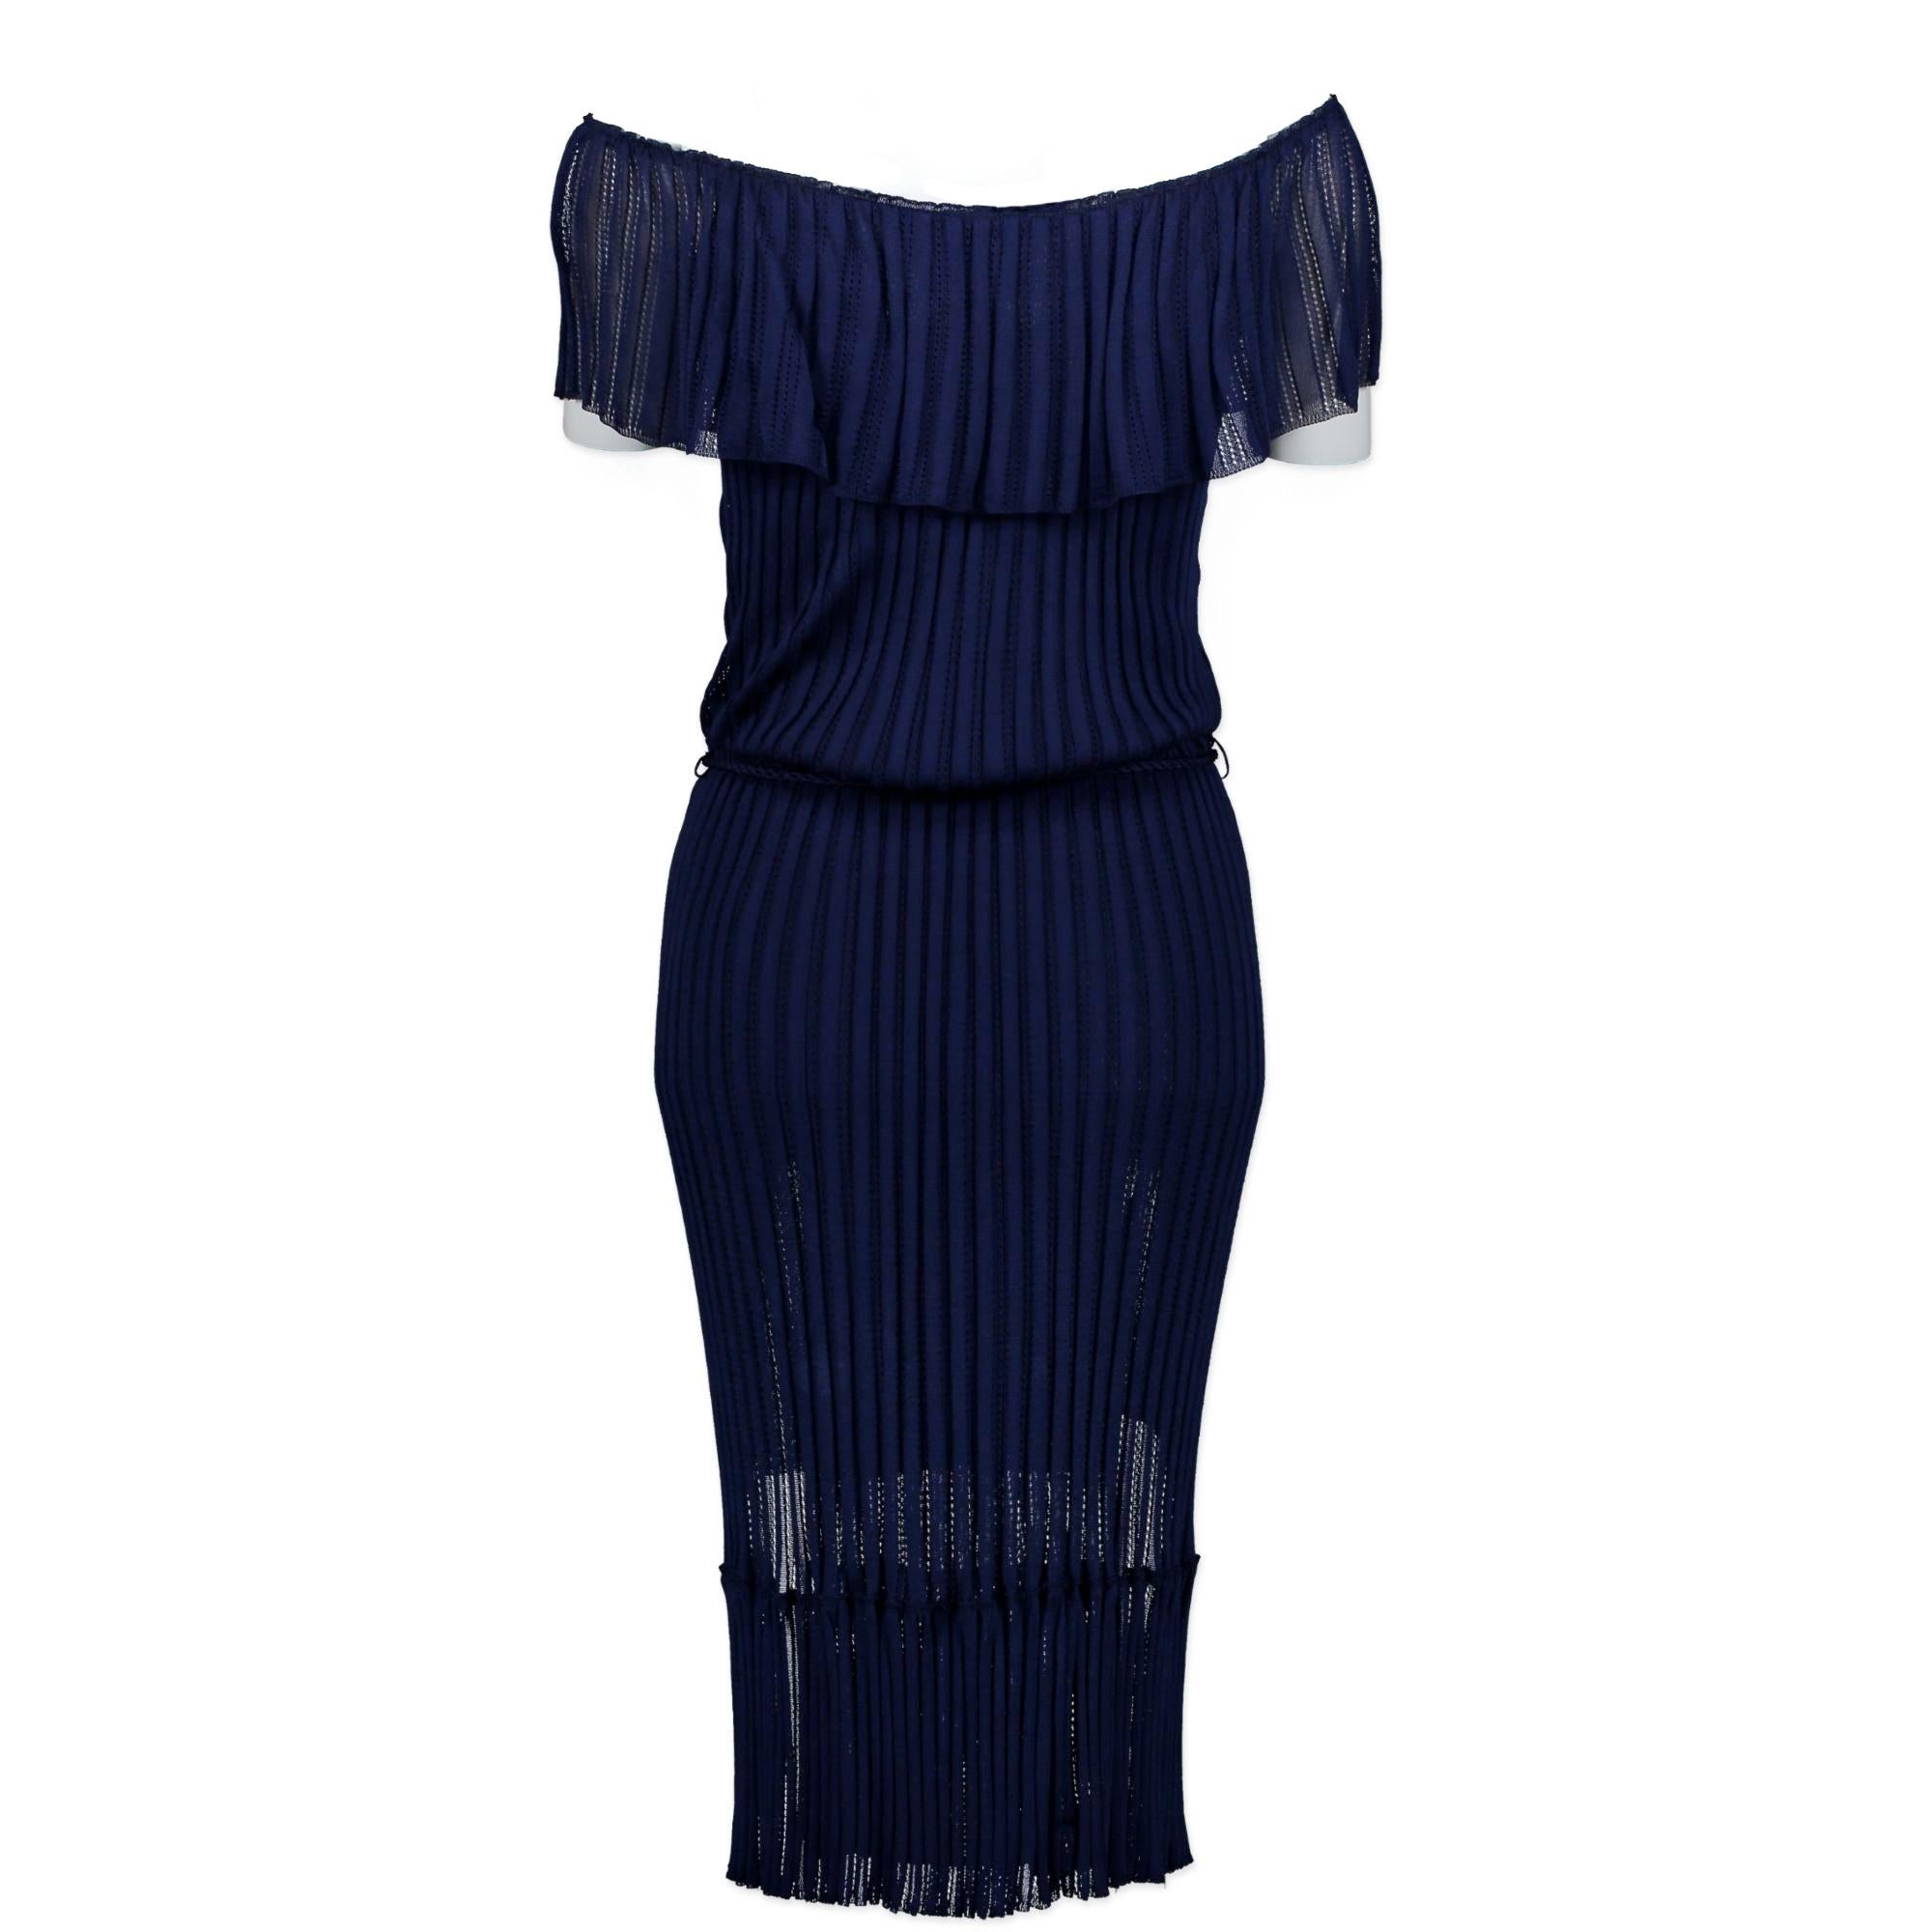 In excellent condition.

Gucci Dark Blue Knit Dress - Size XS

This dark blue off shoulder dress is perfect as a beach dress. Style this dress with some sandals, slippers or some wedges and your ready to go. The belt with tassels and a wooden